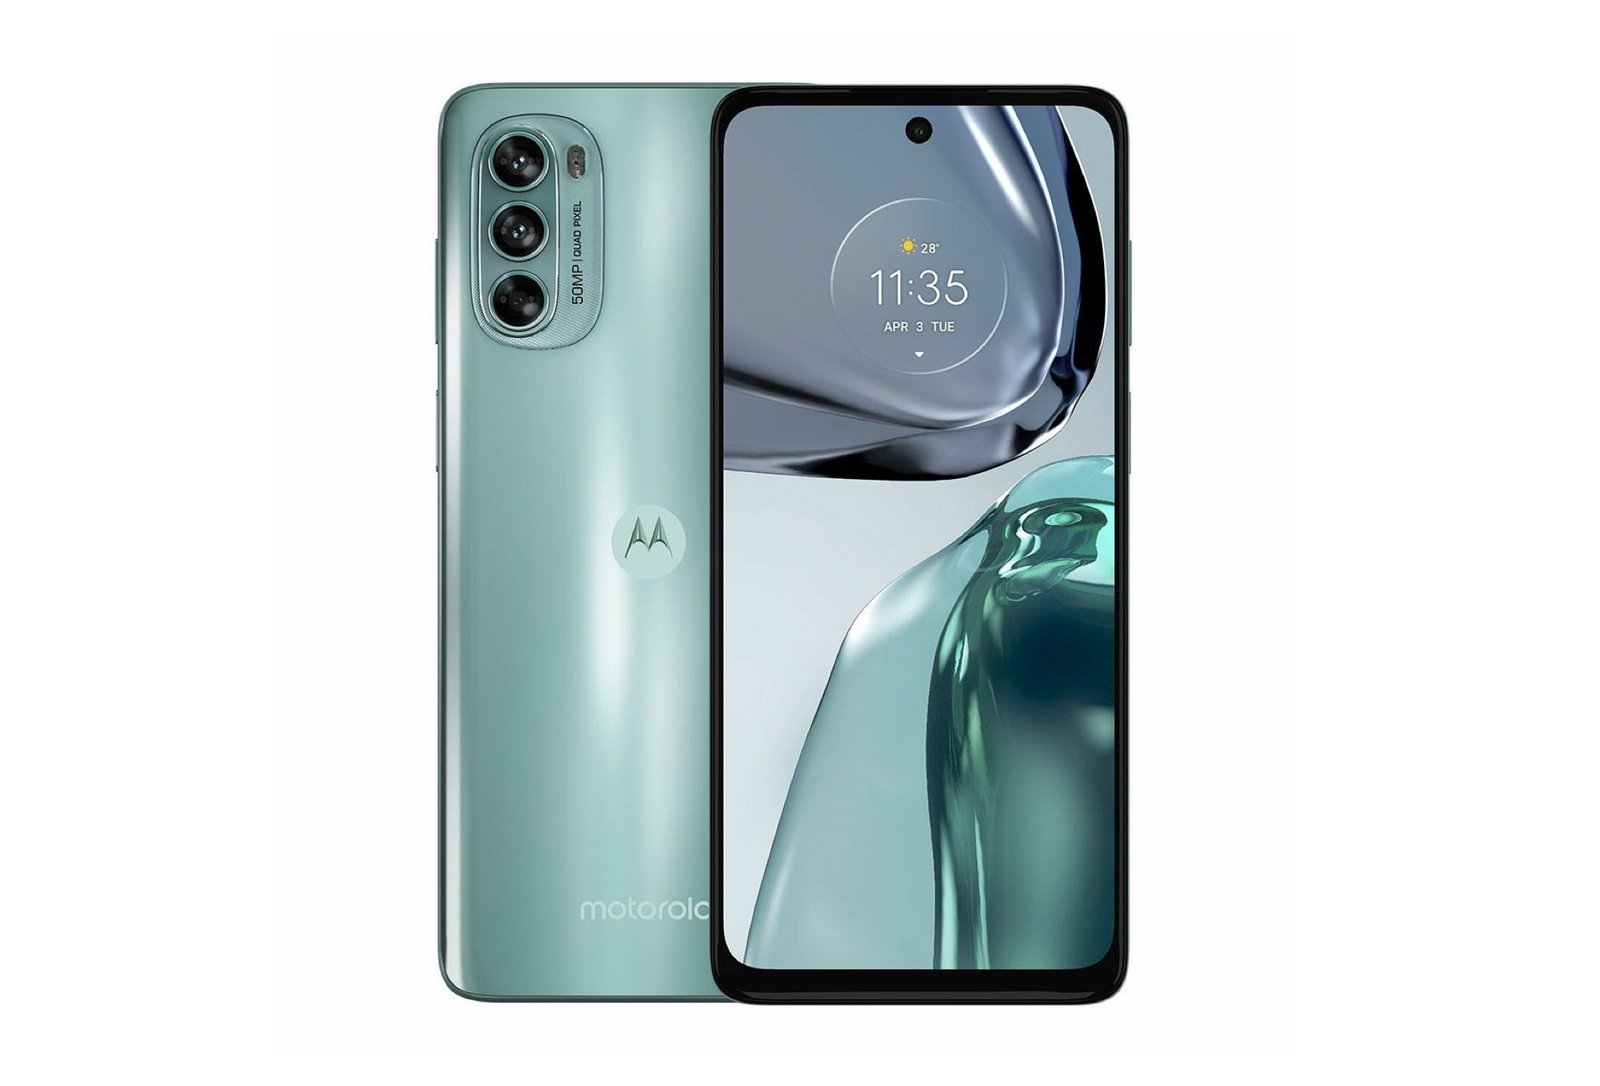 Moto G62 The affordable 5G smartphone will be launched in India on August 11